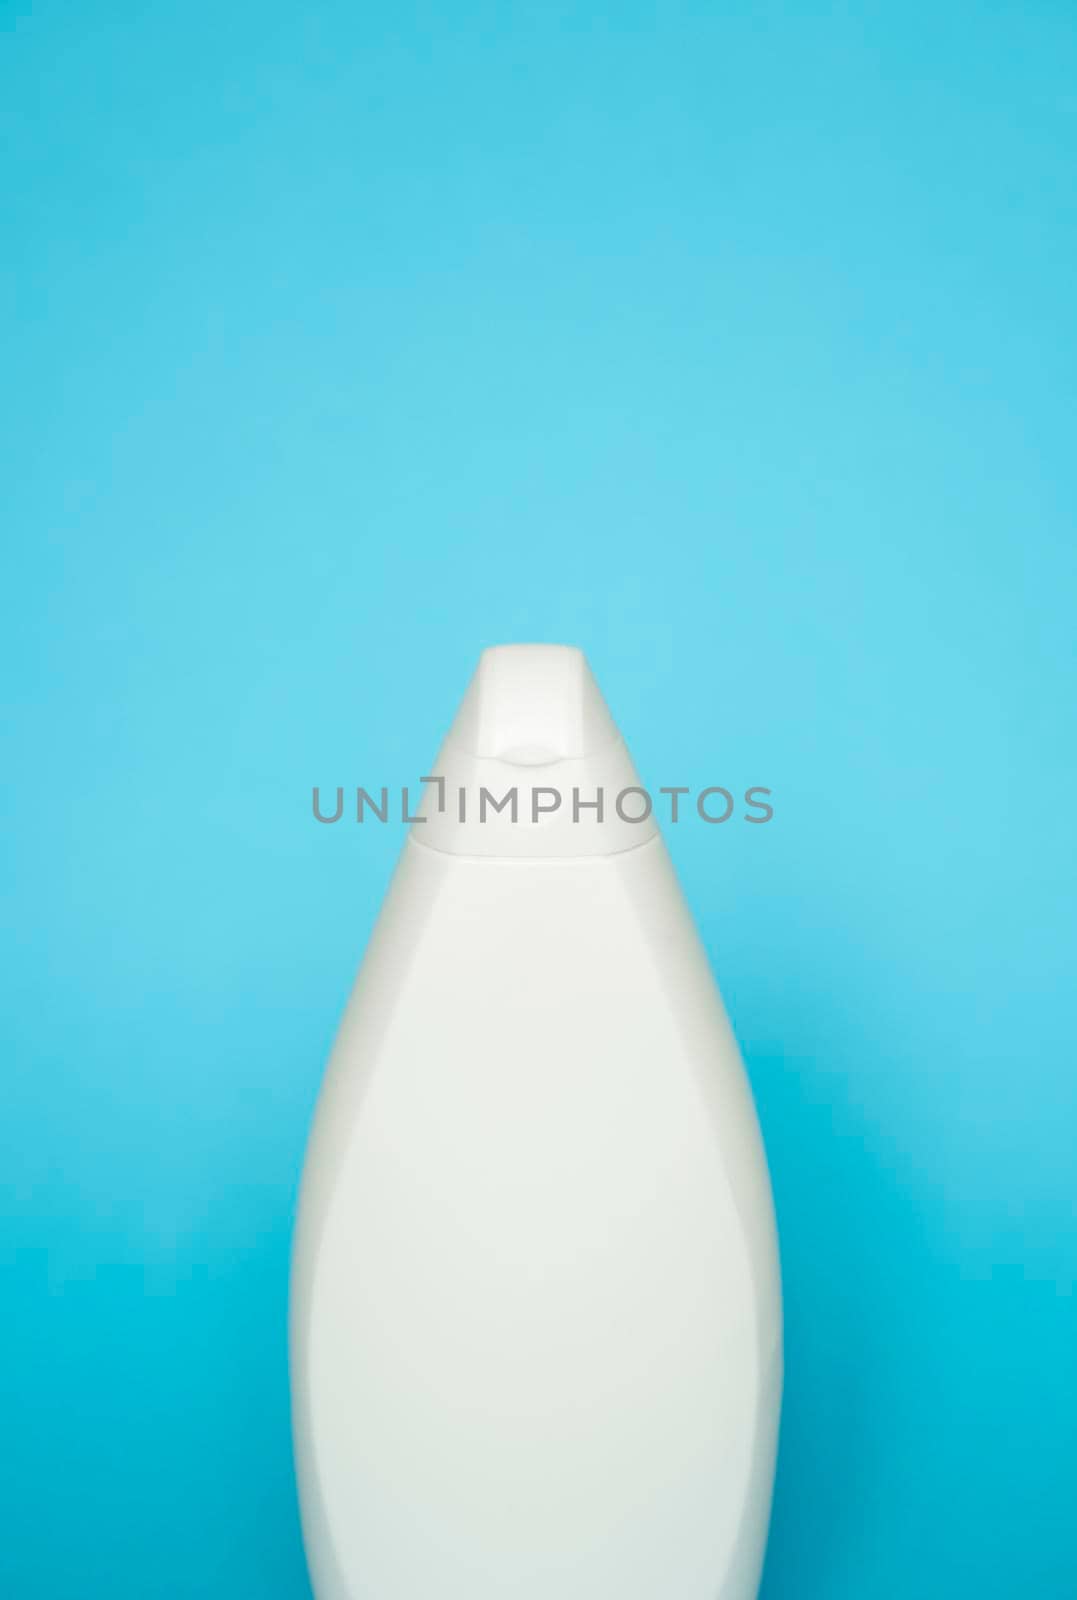 White plastic soap or shampoo bottle isolated on blue background. Skin care lotion. Bathing essential product. Shampoo bottle. Bath and body lotion. Fine liquid hand wash. Bathroom accessories. by vovsht